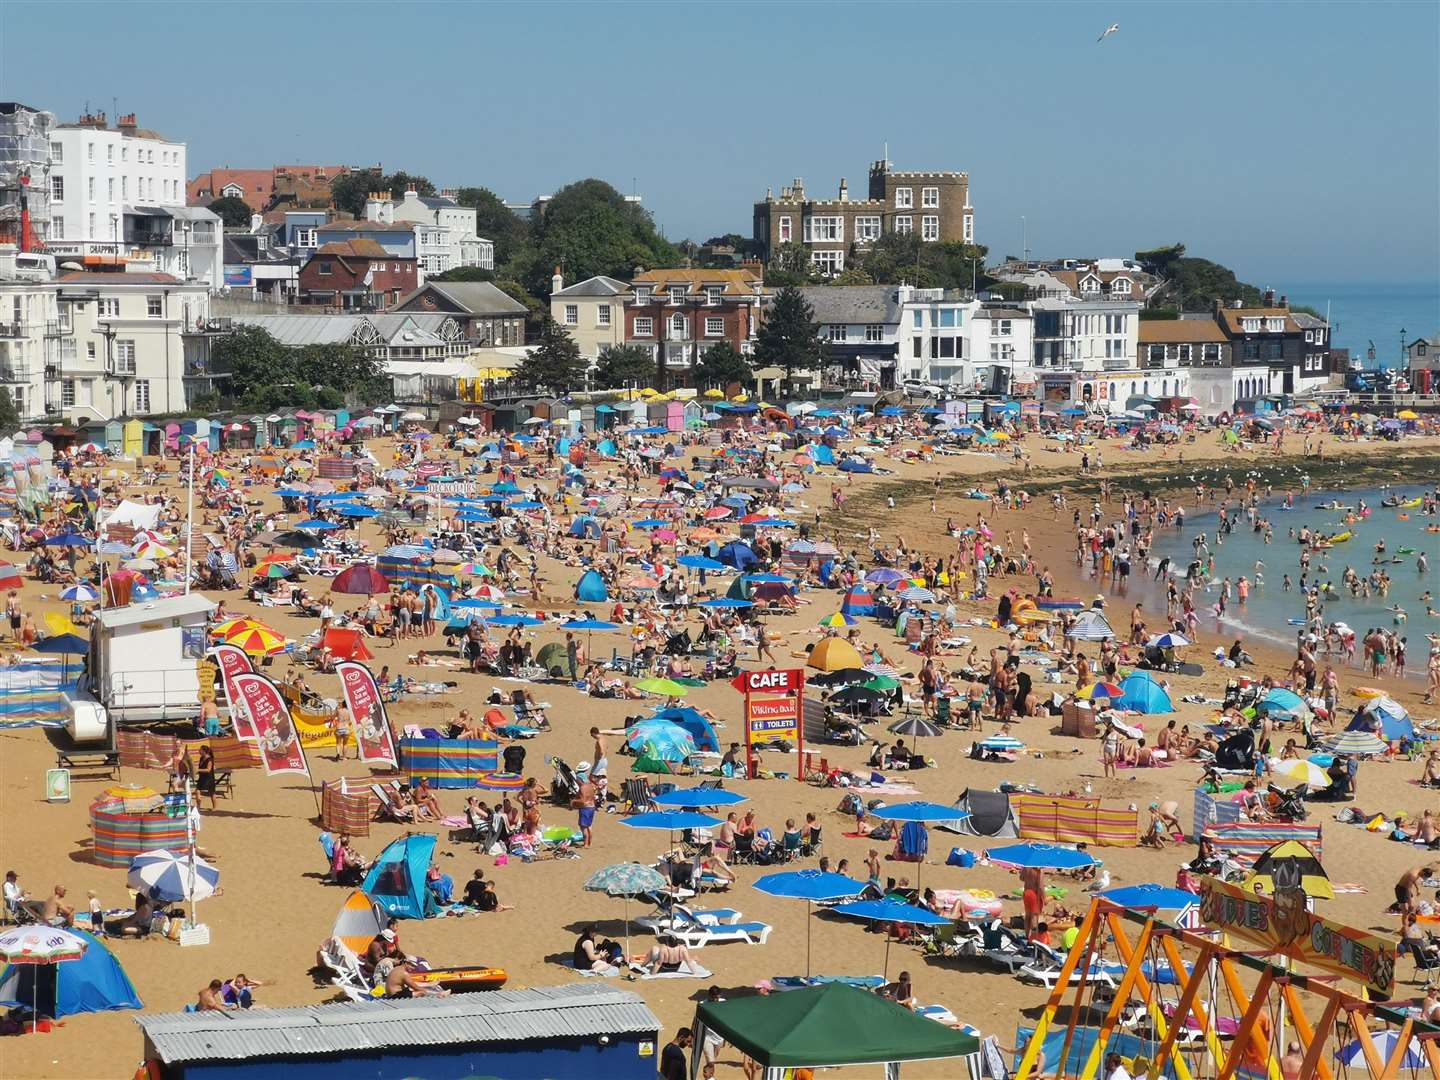 Busy beach in Thanet during previous sunny weather